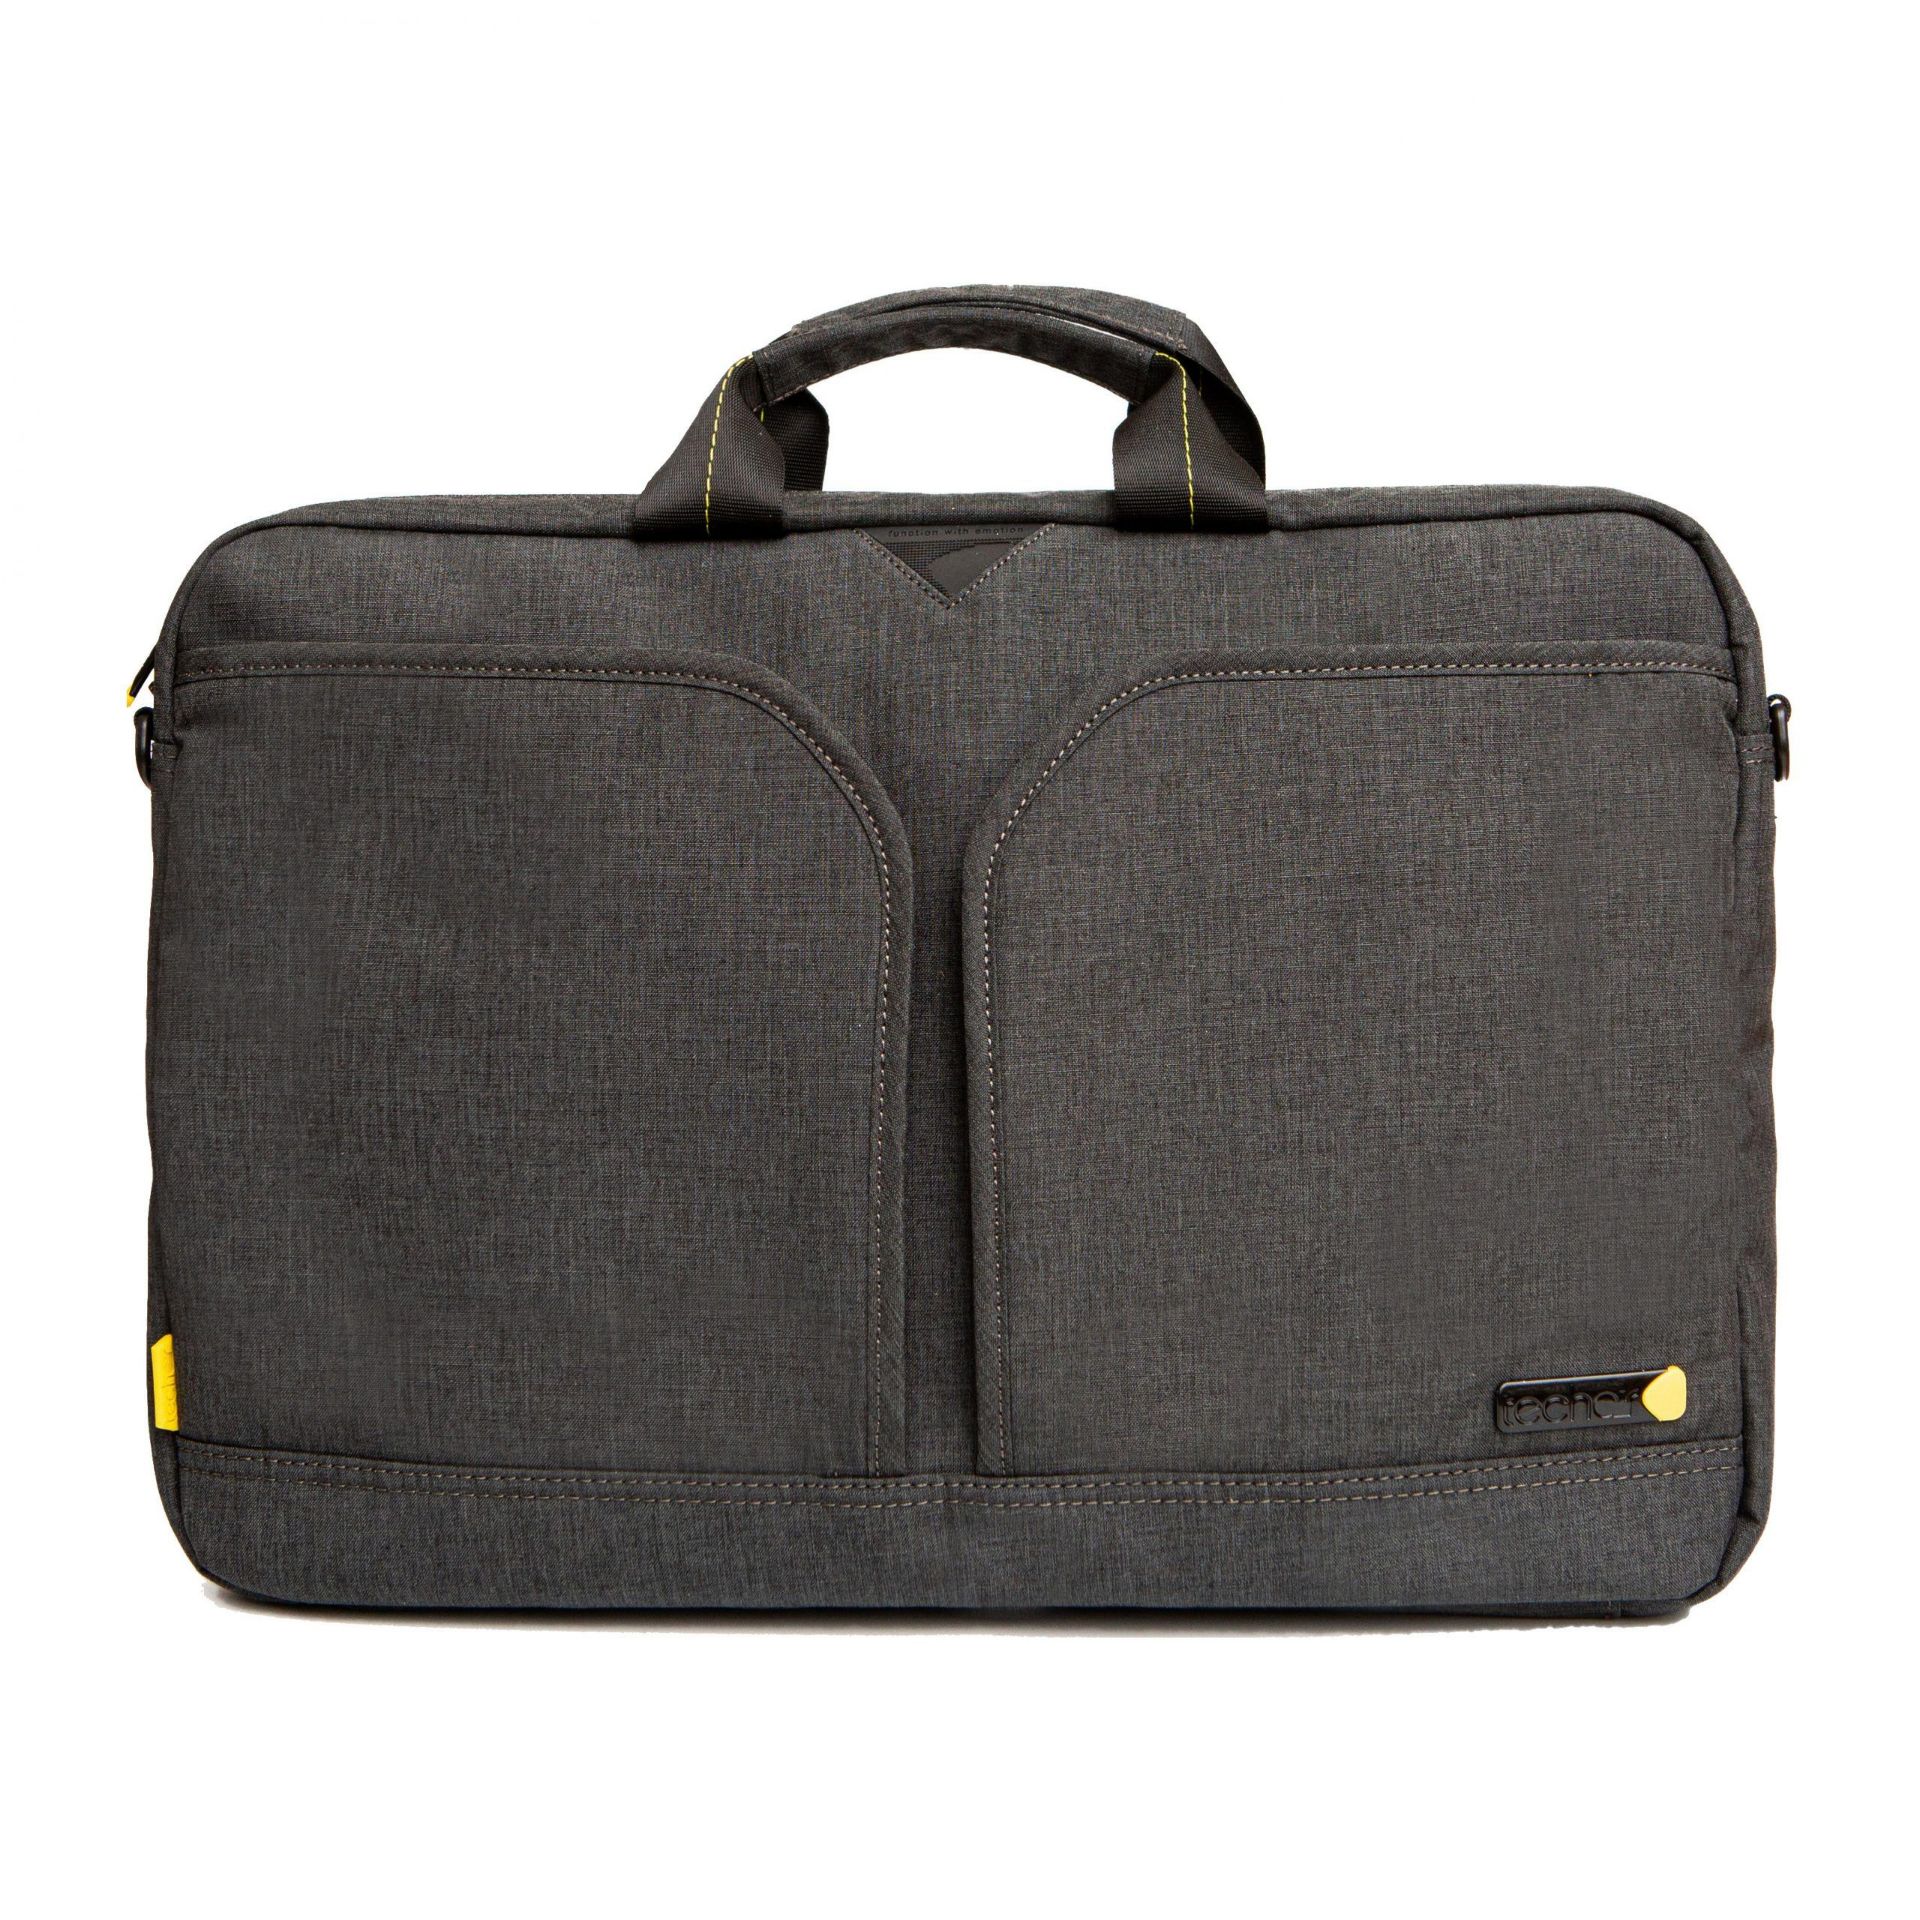 Evo Pro 12 – 13.3? briefcase grey. - P1. This slim and sexy number isn’t just a pretty face. Its